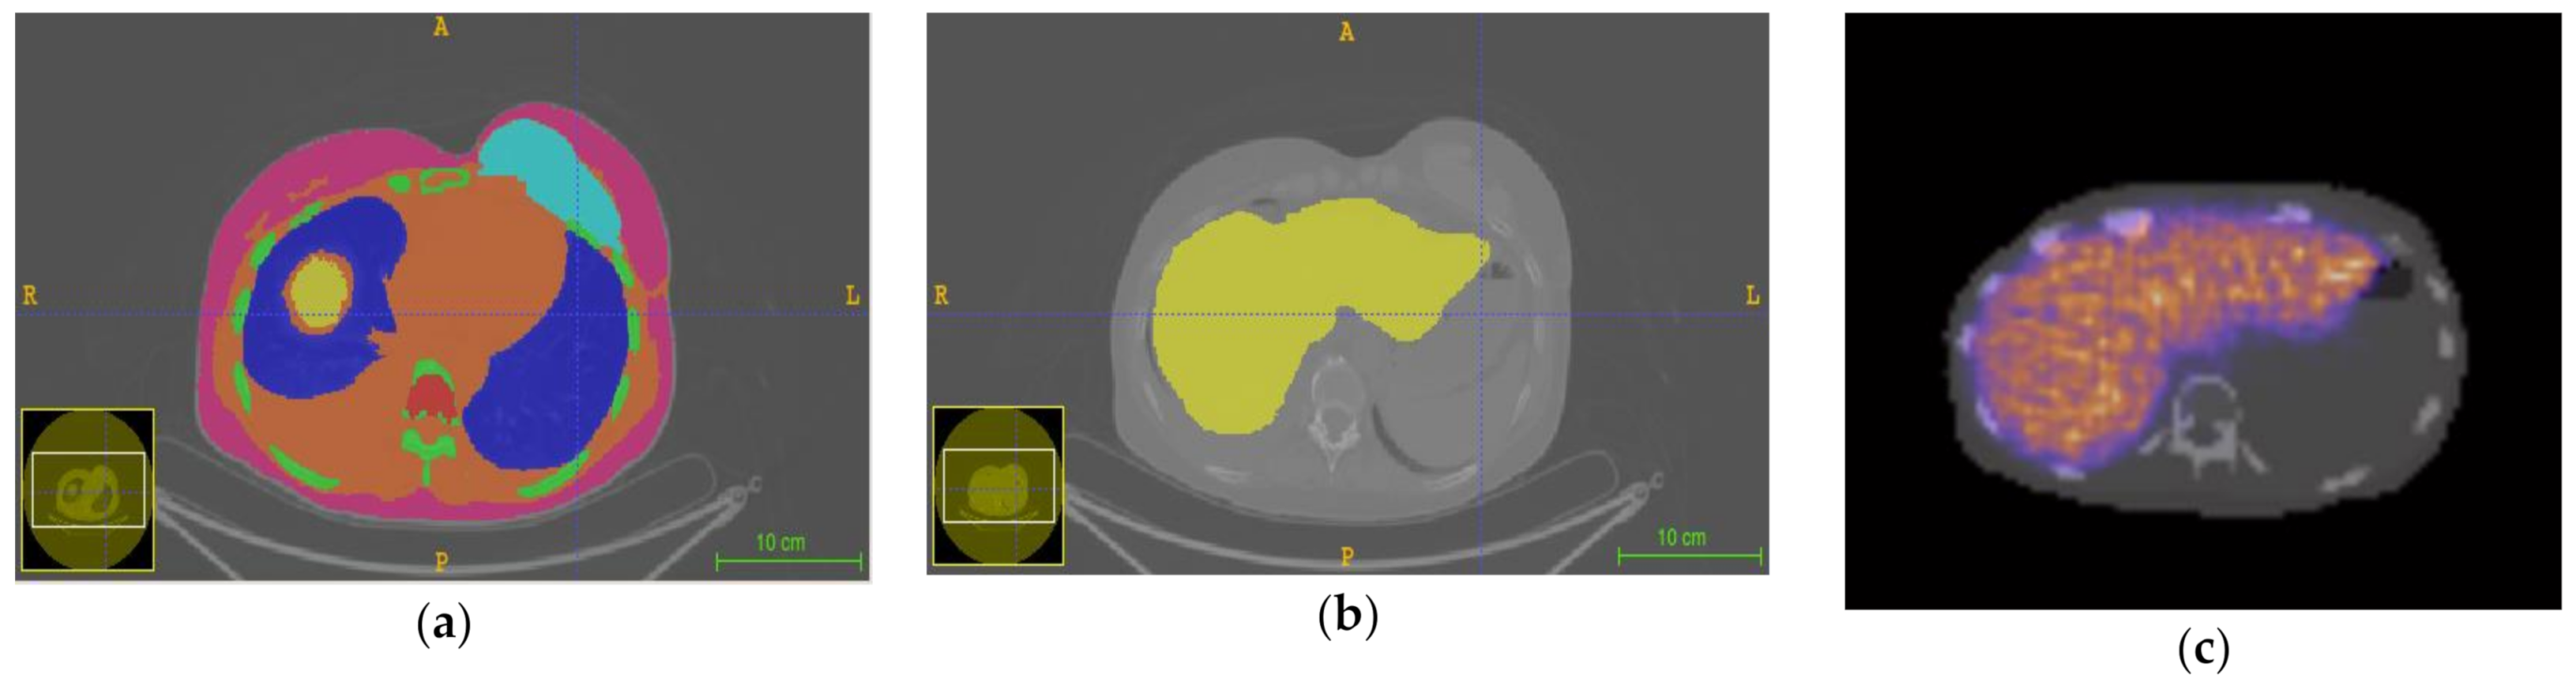 Applied Sciences | Free Full-Text | In Silico Validation of MCID Platform for Monte Carlo-Based Voxel Dosimetry to 90Y-Radioembolization of Liver Malignancies | HTML